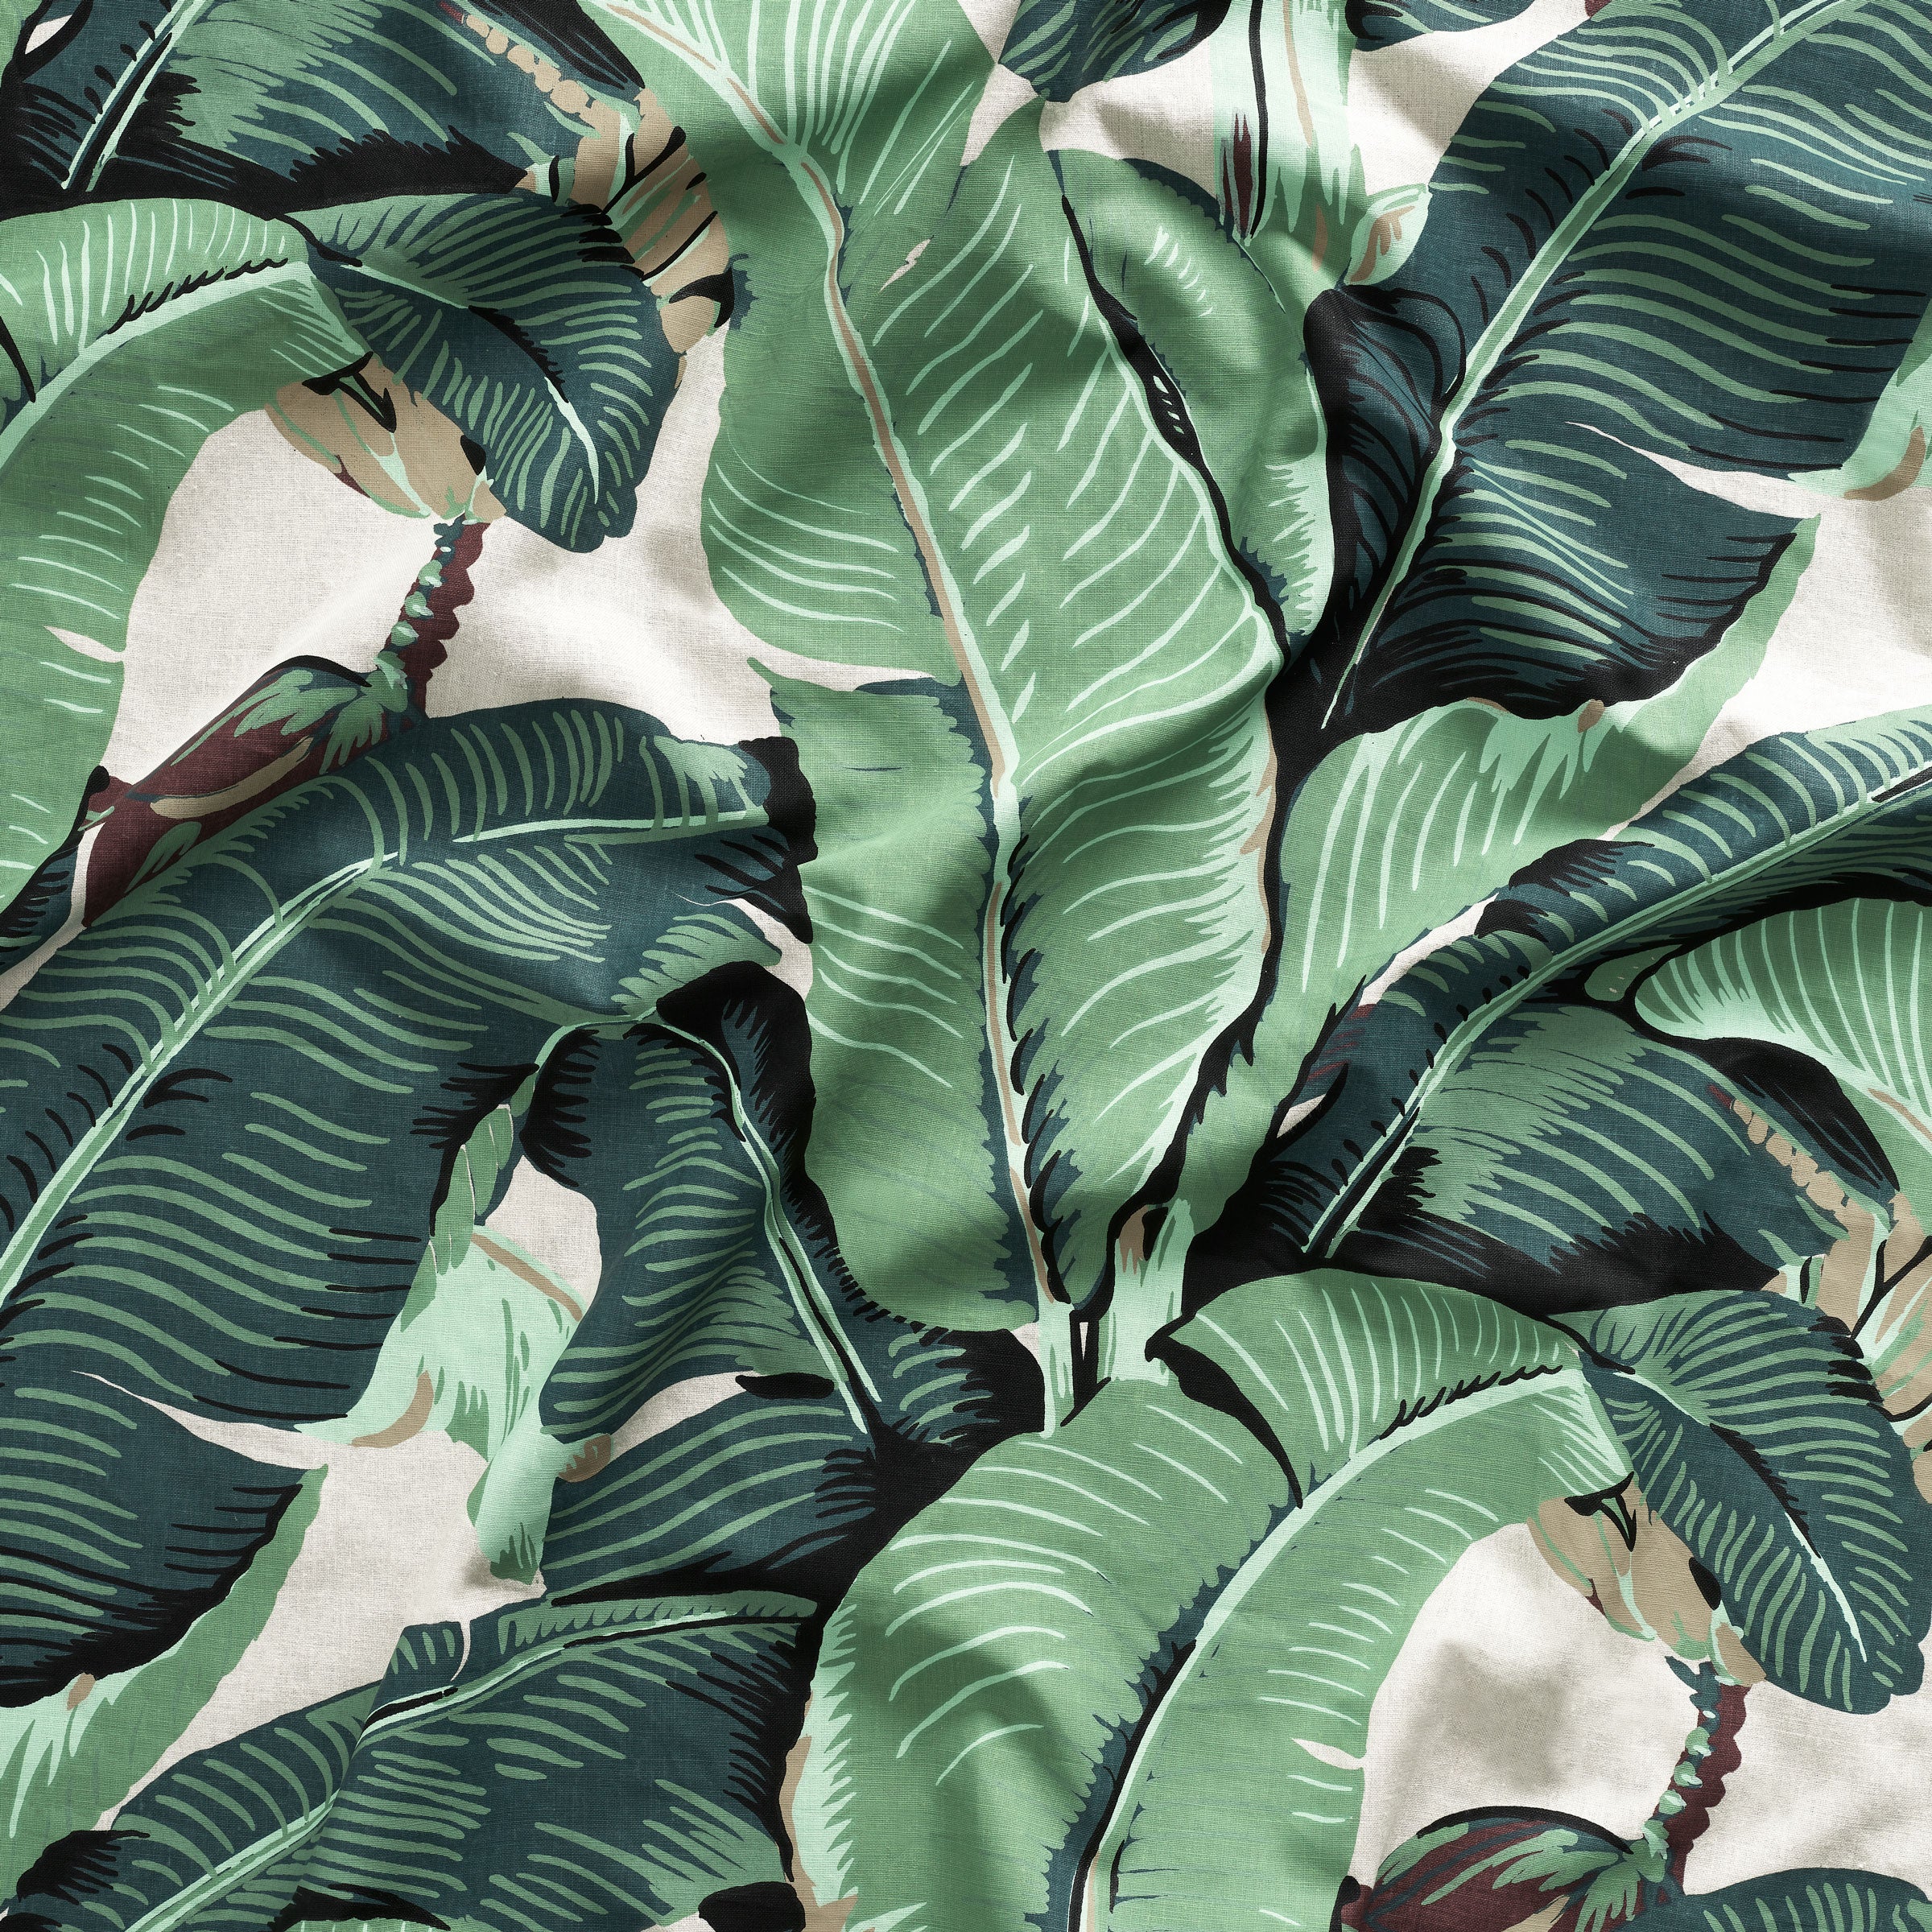 10 Banana Leaf Wallpaper Instagrams to Celebrate the Coming of Spring   Vogue